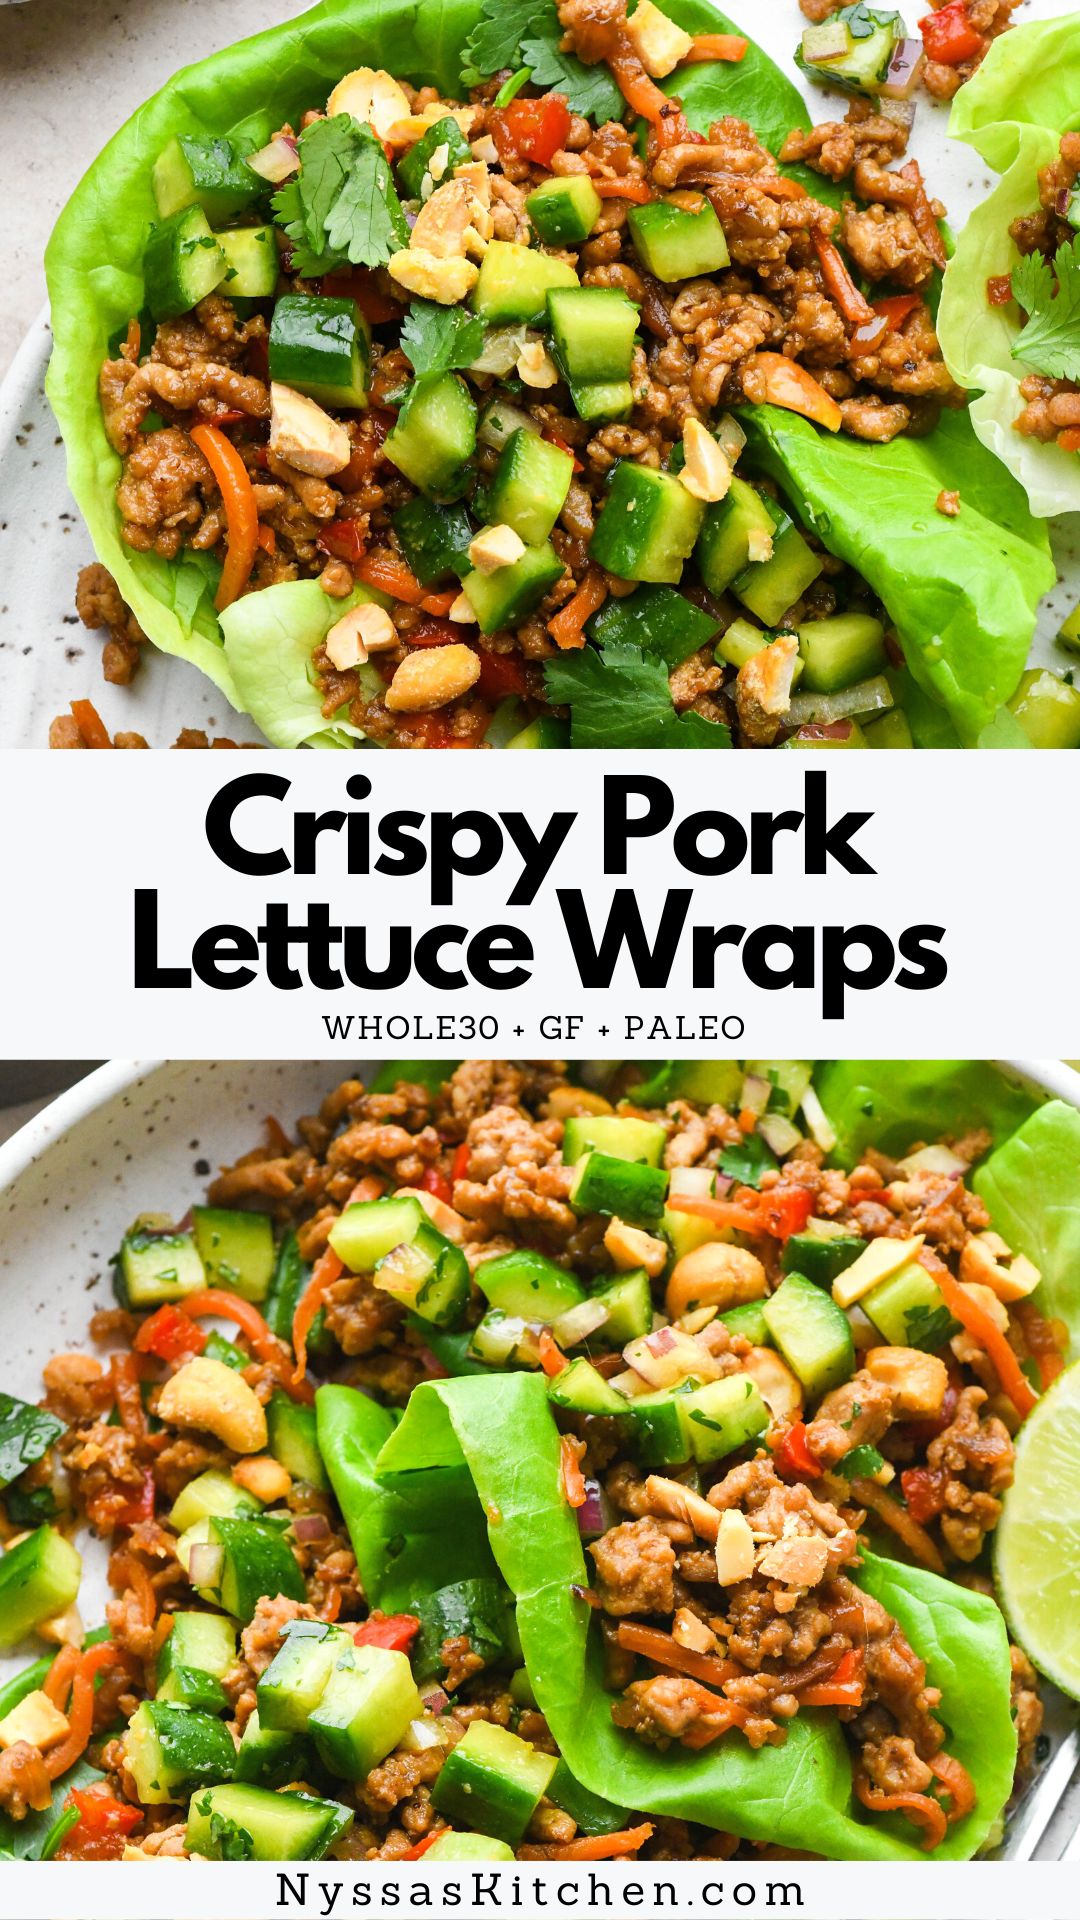 These pork lettuce wraps are a vibrant and flavorful recipe that is ready in less than 30 minutes! Protein rich and made with lots of veggies for an asian inspired meal you'll feel good about serving to the whole family. Gluten free, dairy free, soy free, Whole30 compatible, and Paleo.